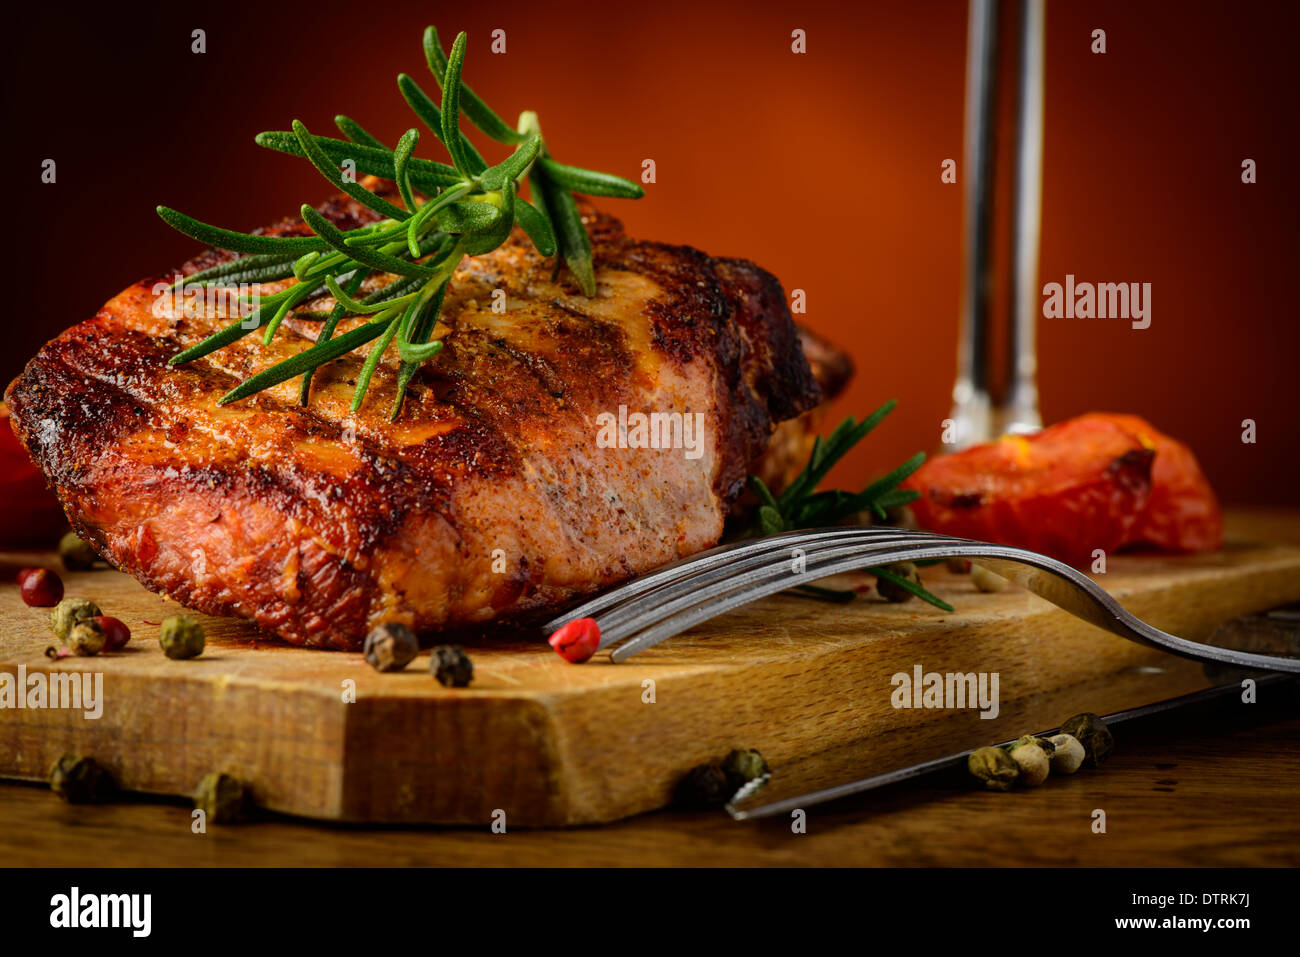 still life with grilled steak closeup detail and rosemary Stock Photo